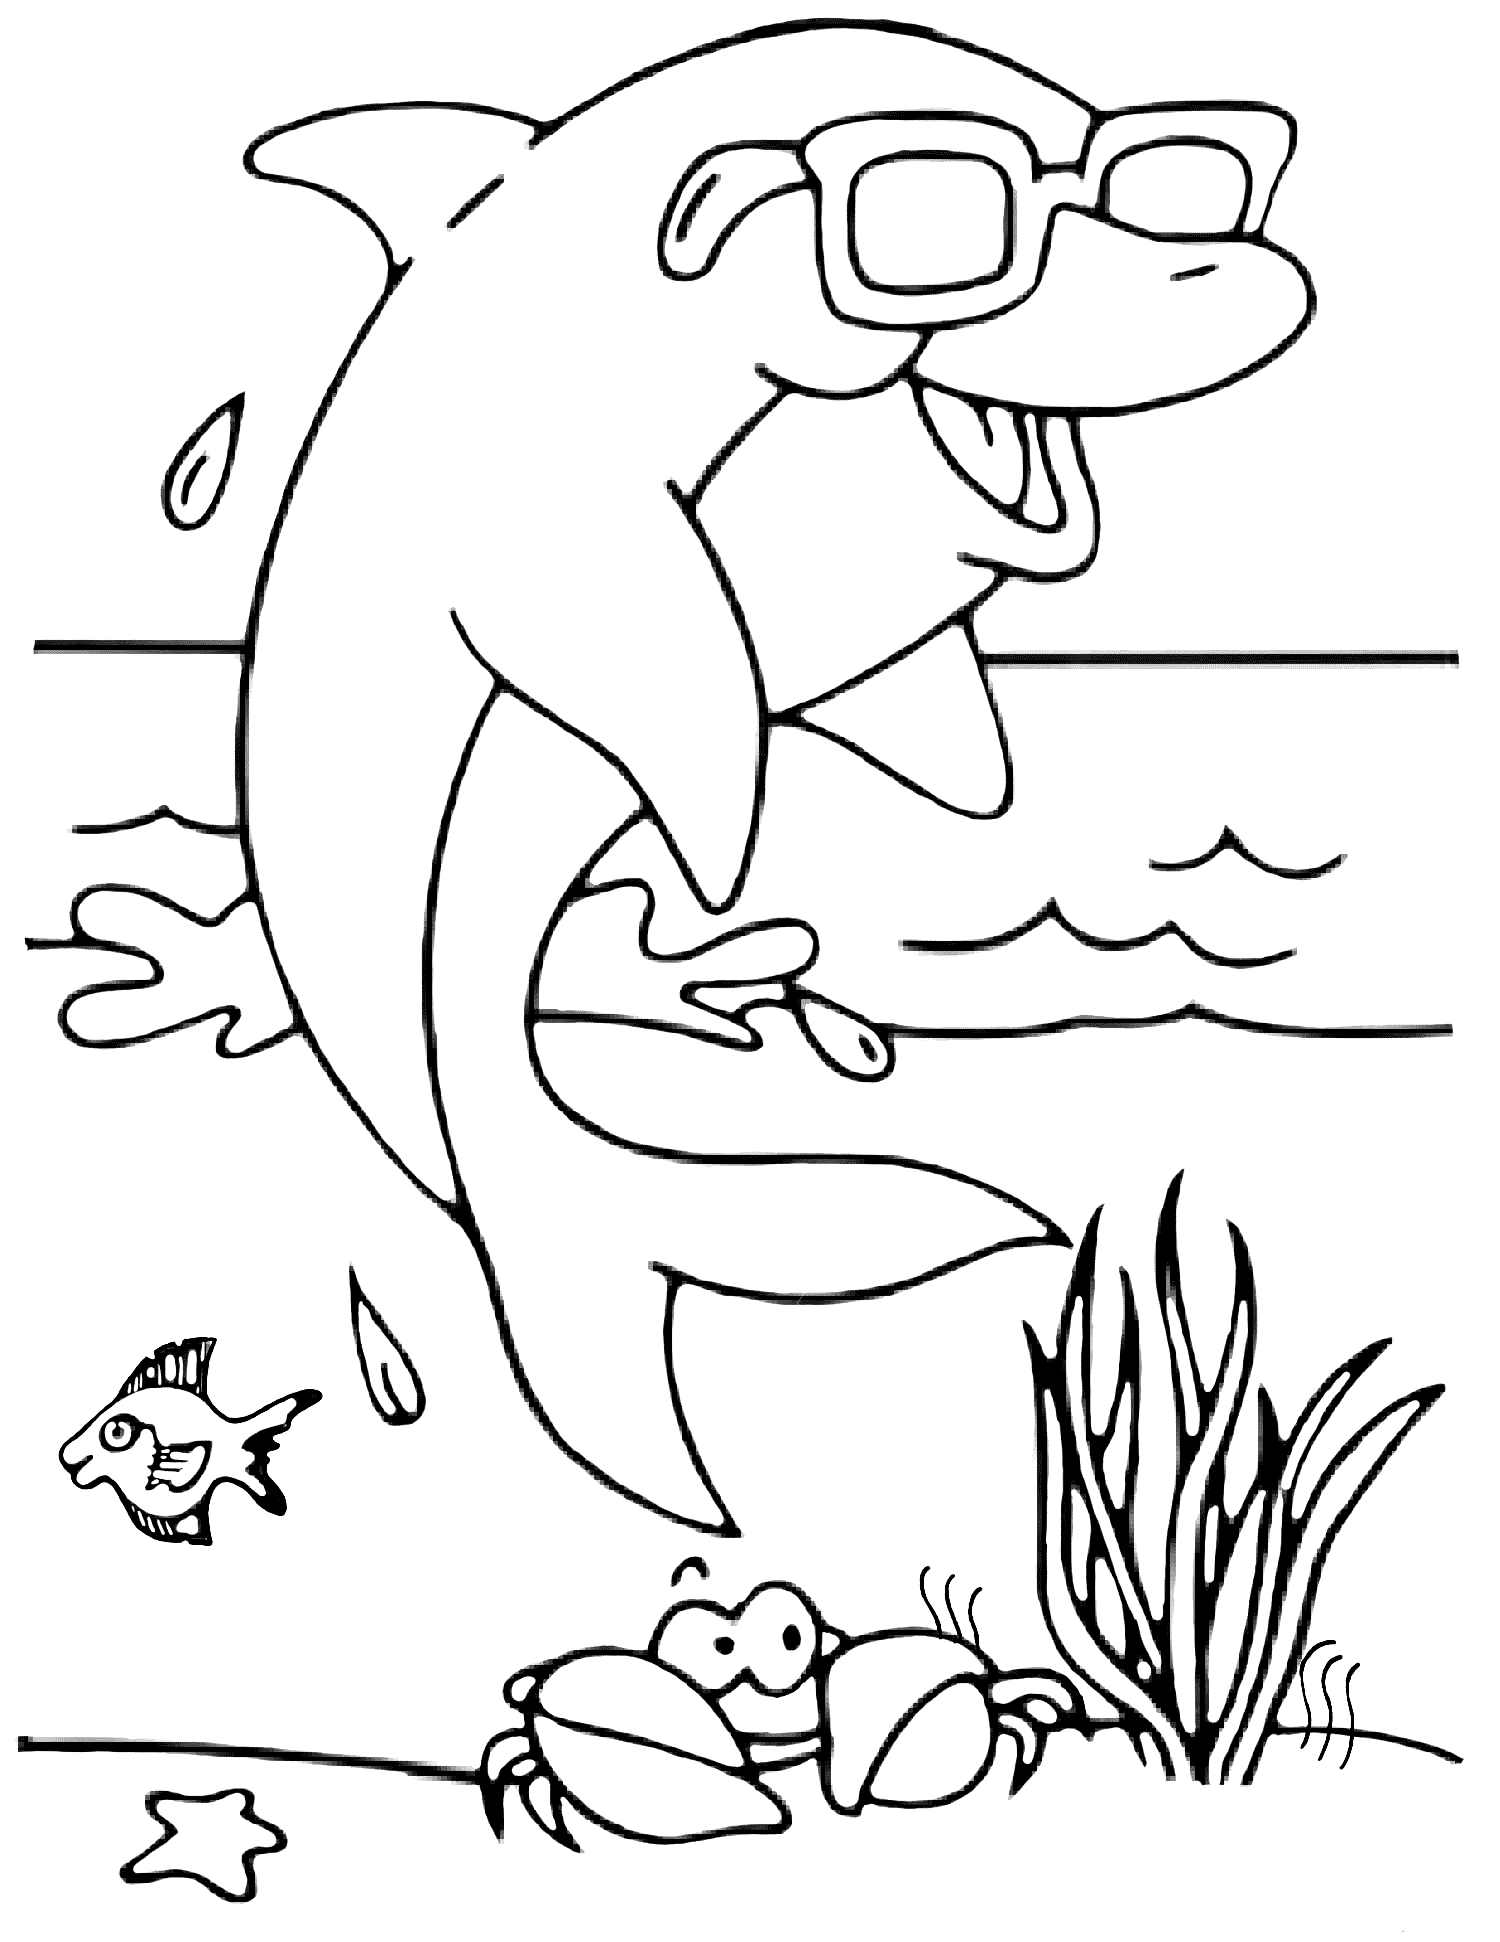 Dolphin with glasses - Animal Coloring pages for kids to ...